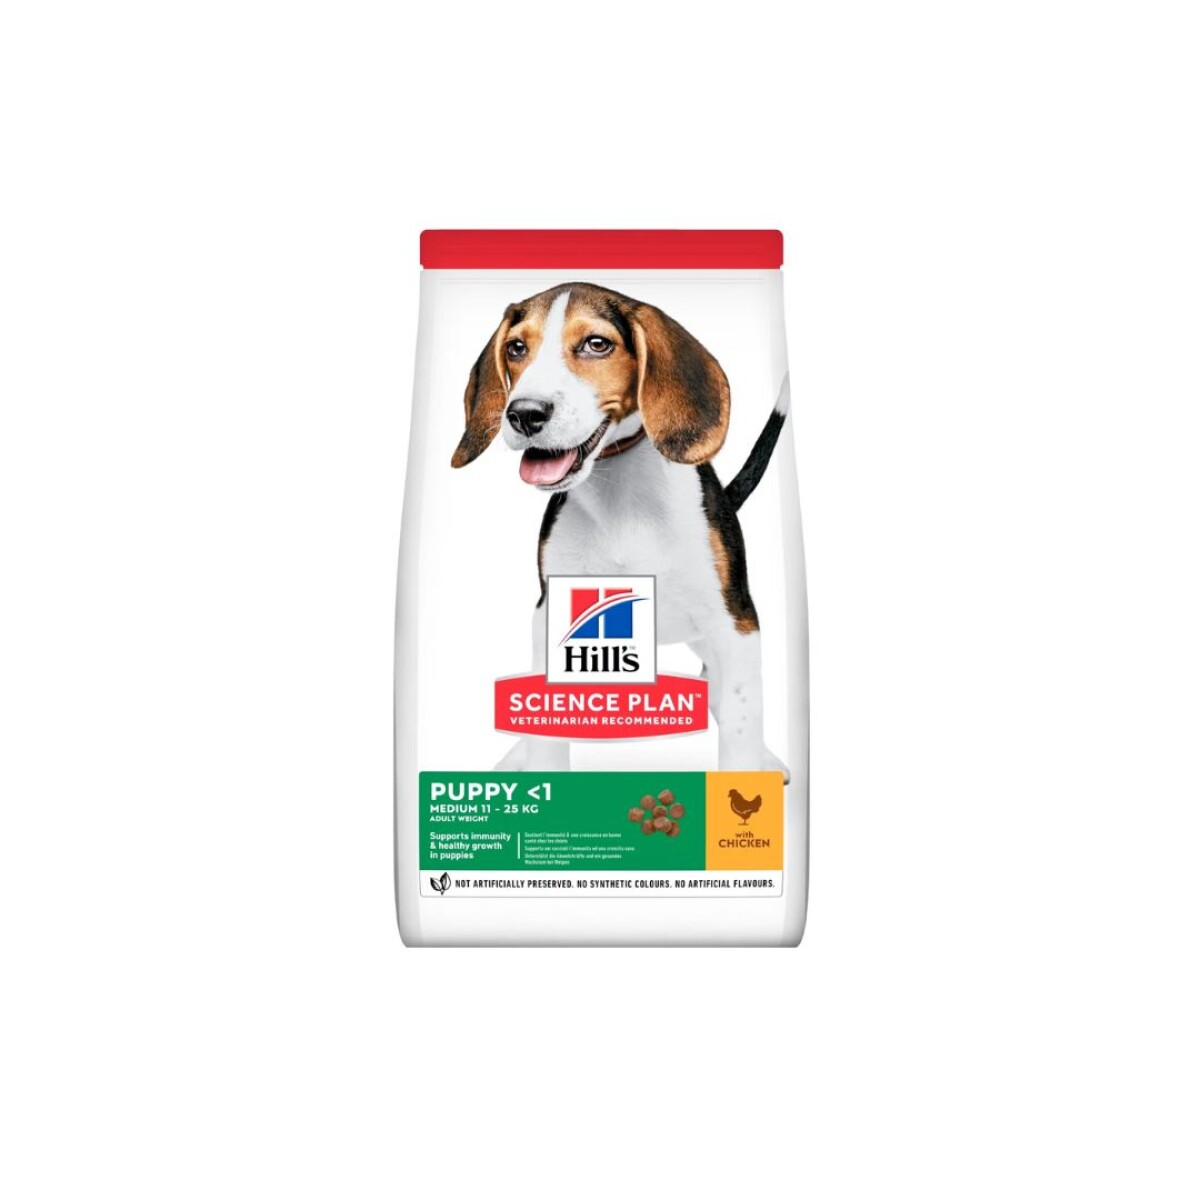 HILLS CANINE PUPPY 2.04 KG - Unica 